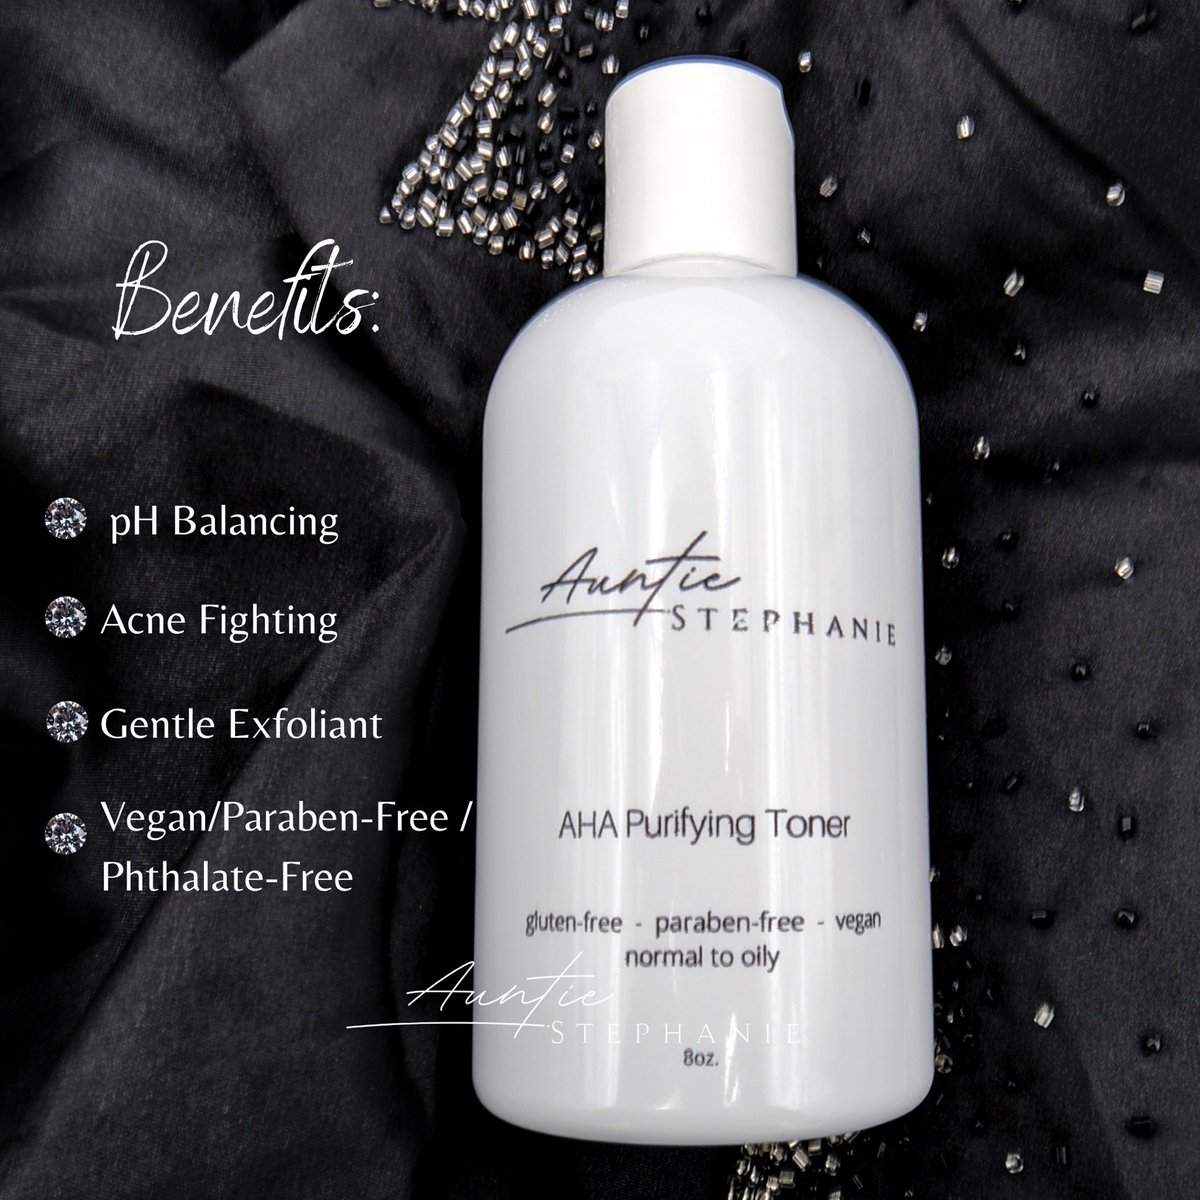 Not the #toner you asked for, but the toner you need. 

#auntiestephanie #veganskincareproducts #veganskincare #womanownedbusiness #facecareroutine #faceproducts #faceproductskincare #skincareblogger #skincareblog #skincareanswers #blackownedbusinesses #blackownedbusiness